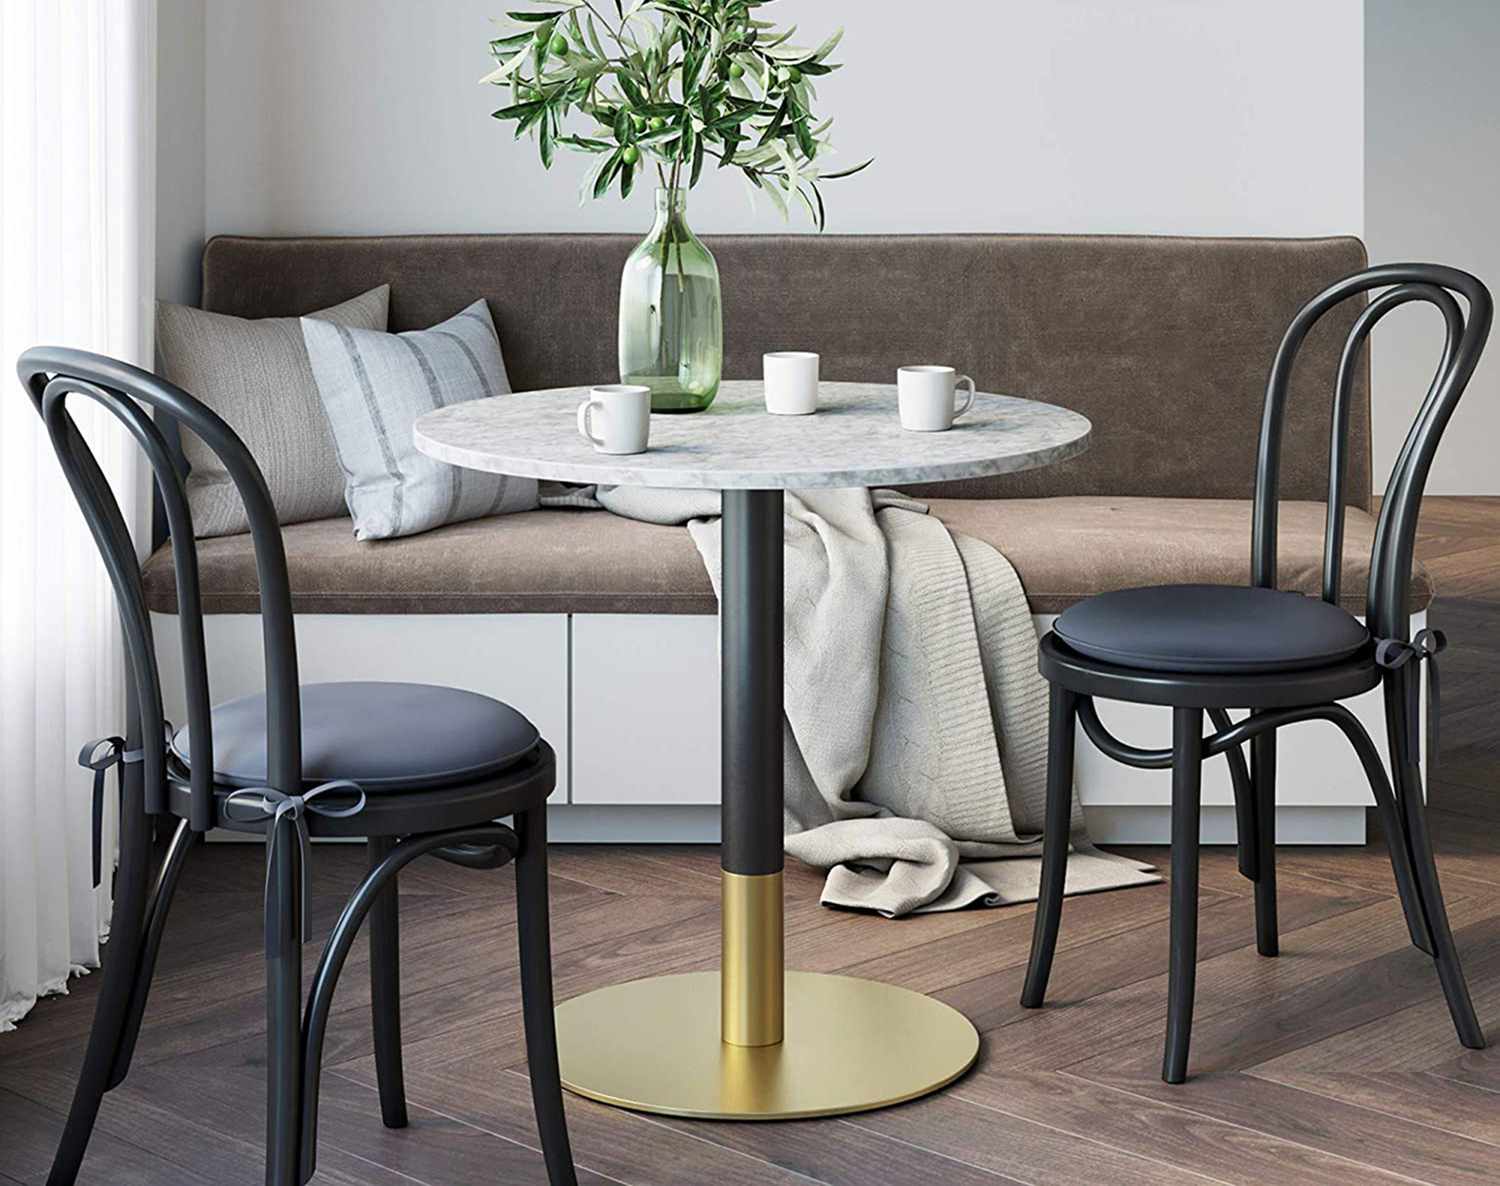 8 Best Dining Tables For Small Spaces, Round Tables For Kitchen